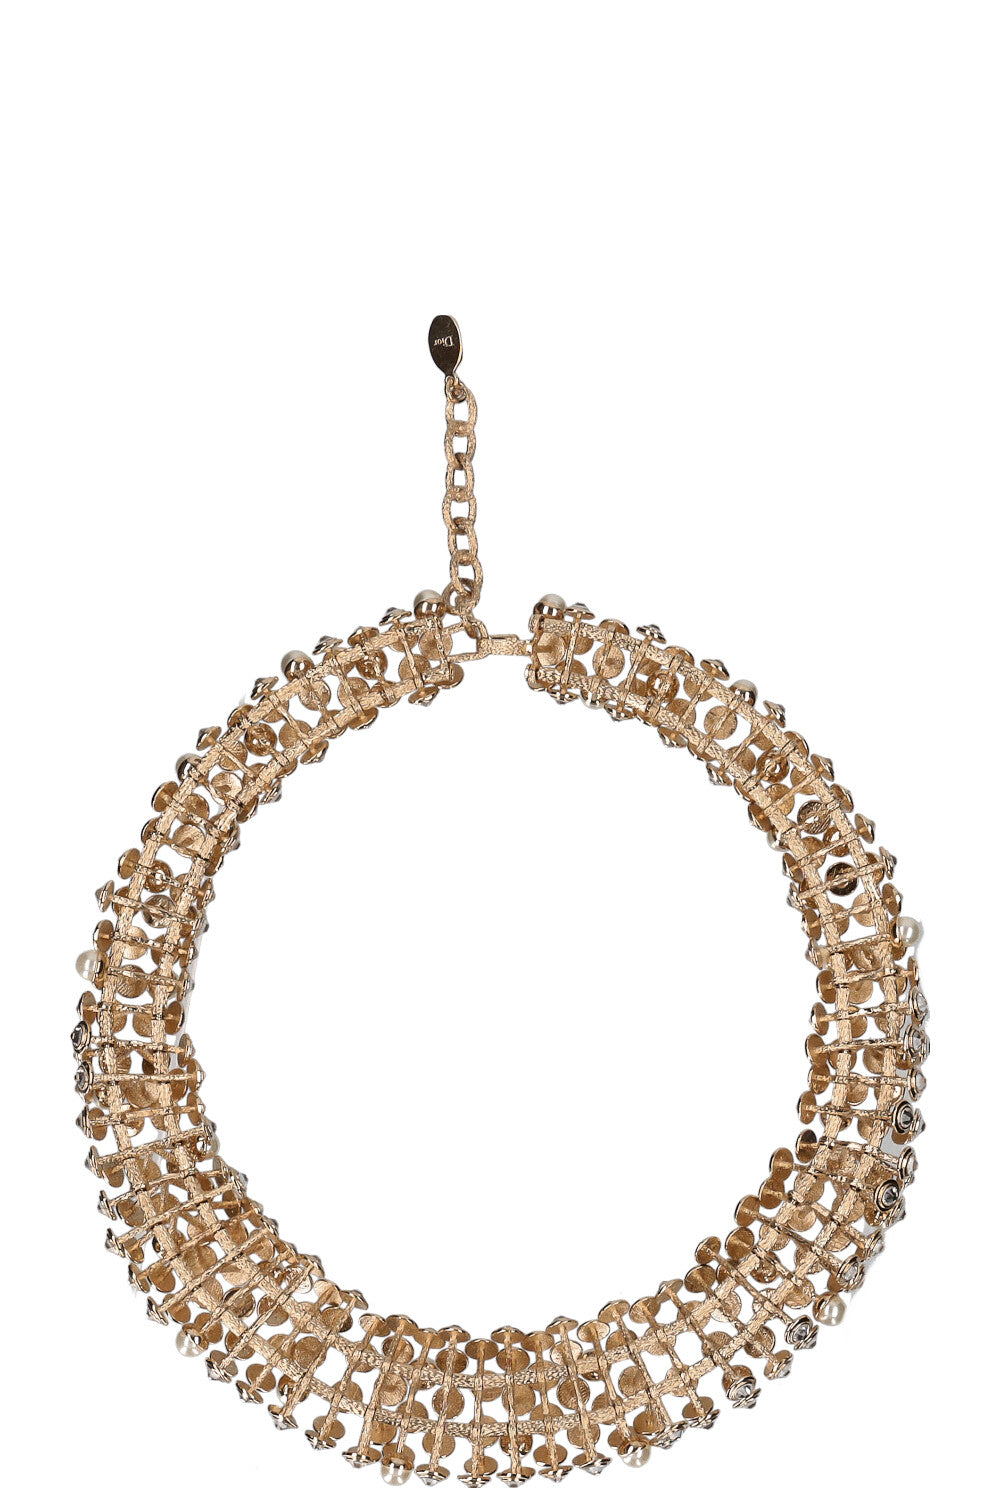 CHRISTIAN DIOR Crystal Necklace Champagne Gold